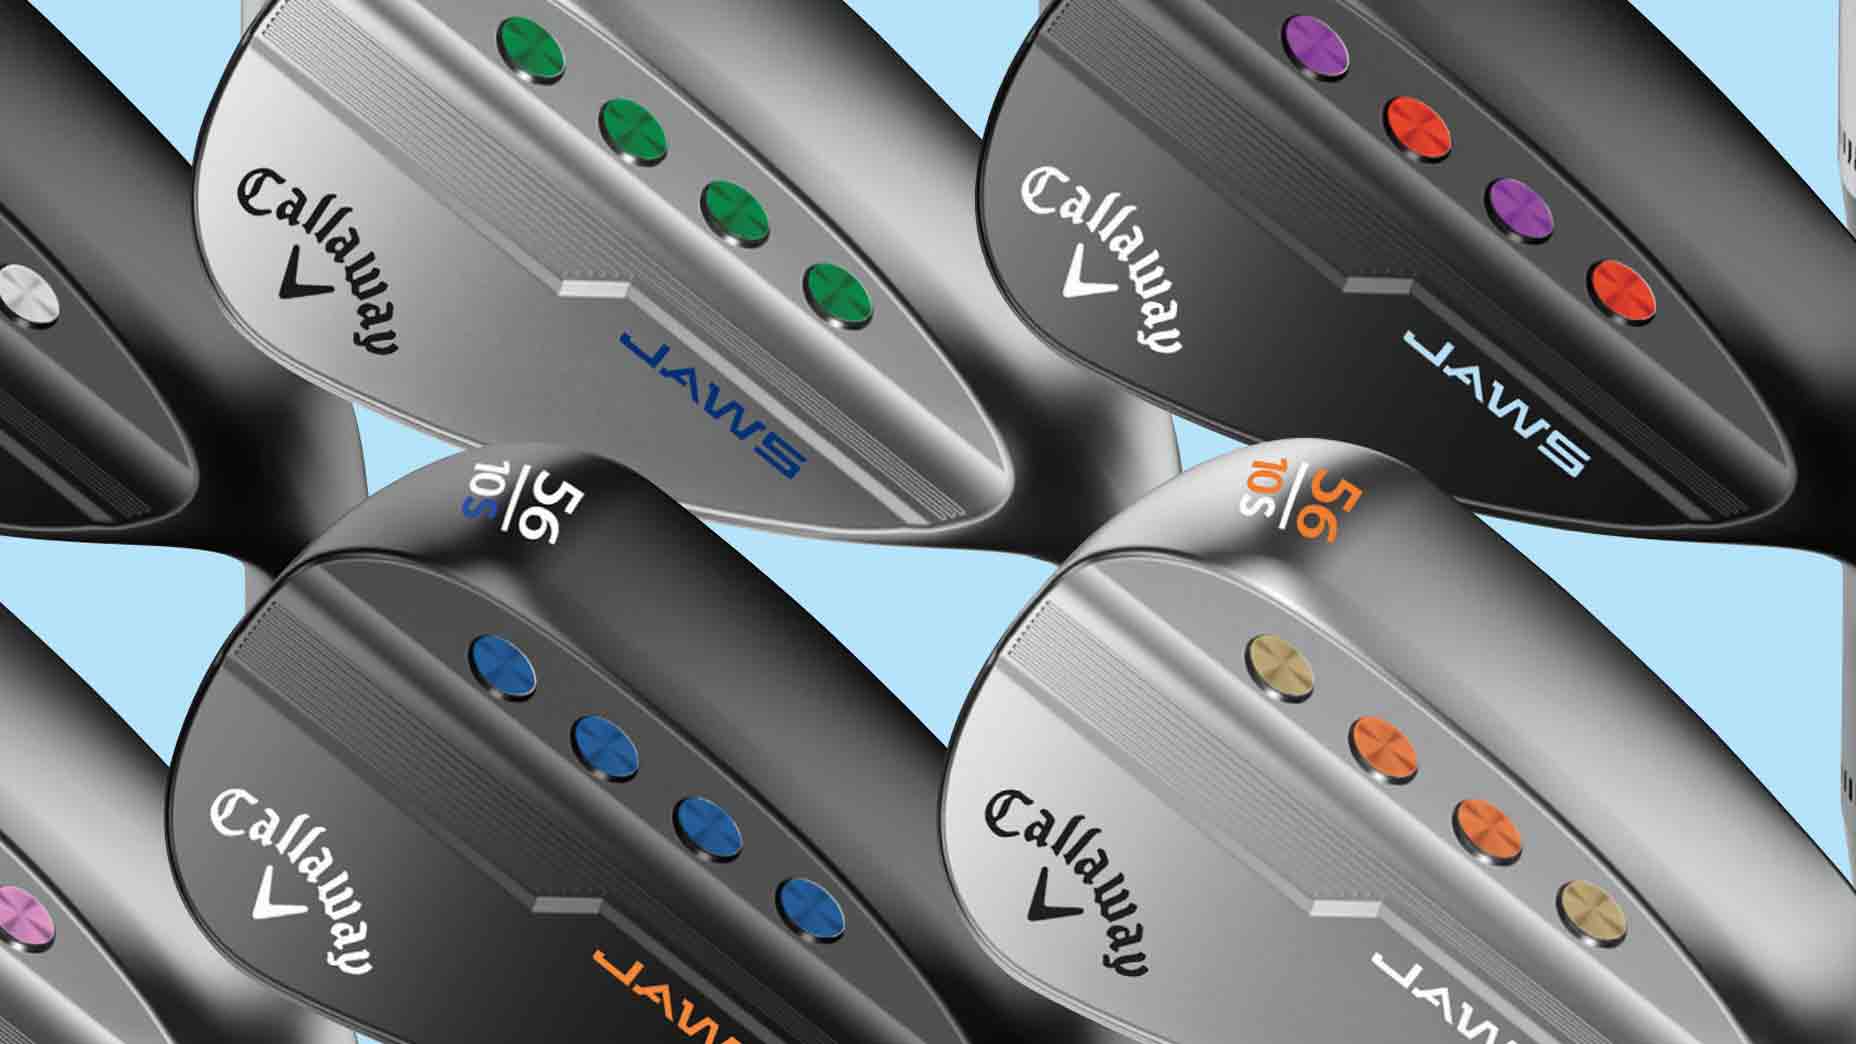 Callaways club configurator customizes every part of your wedge